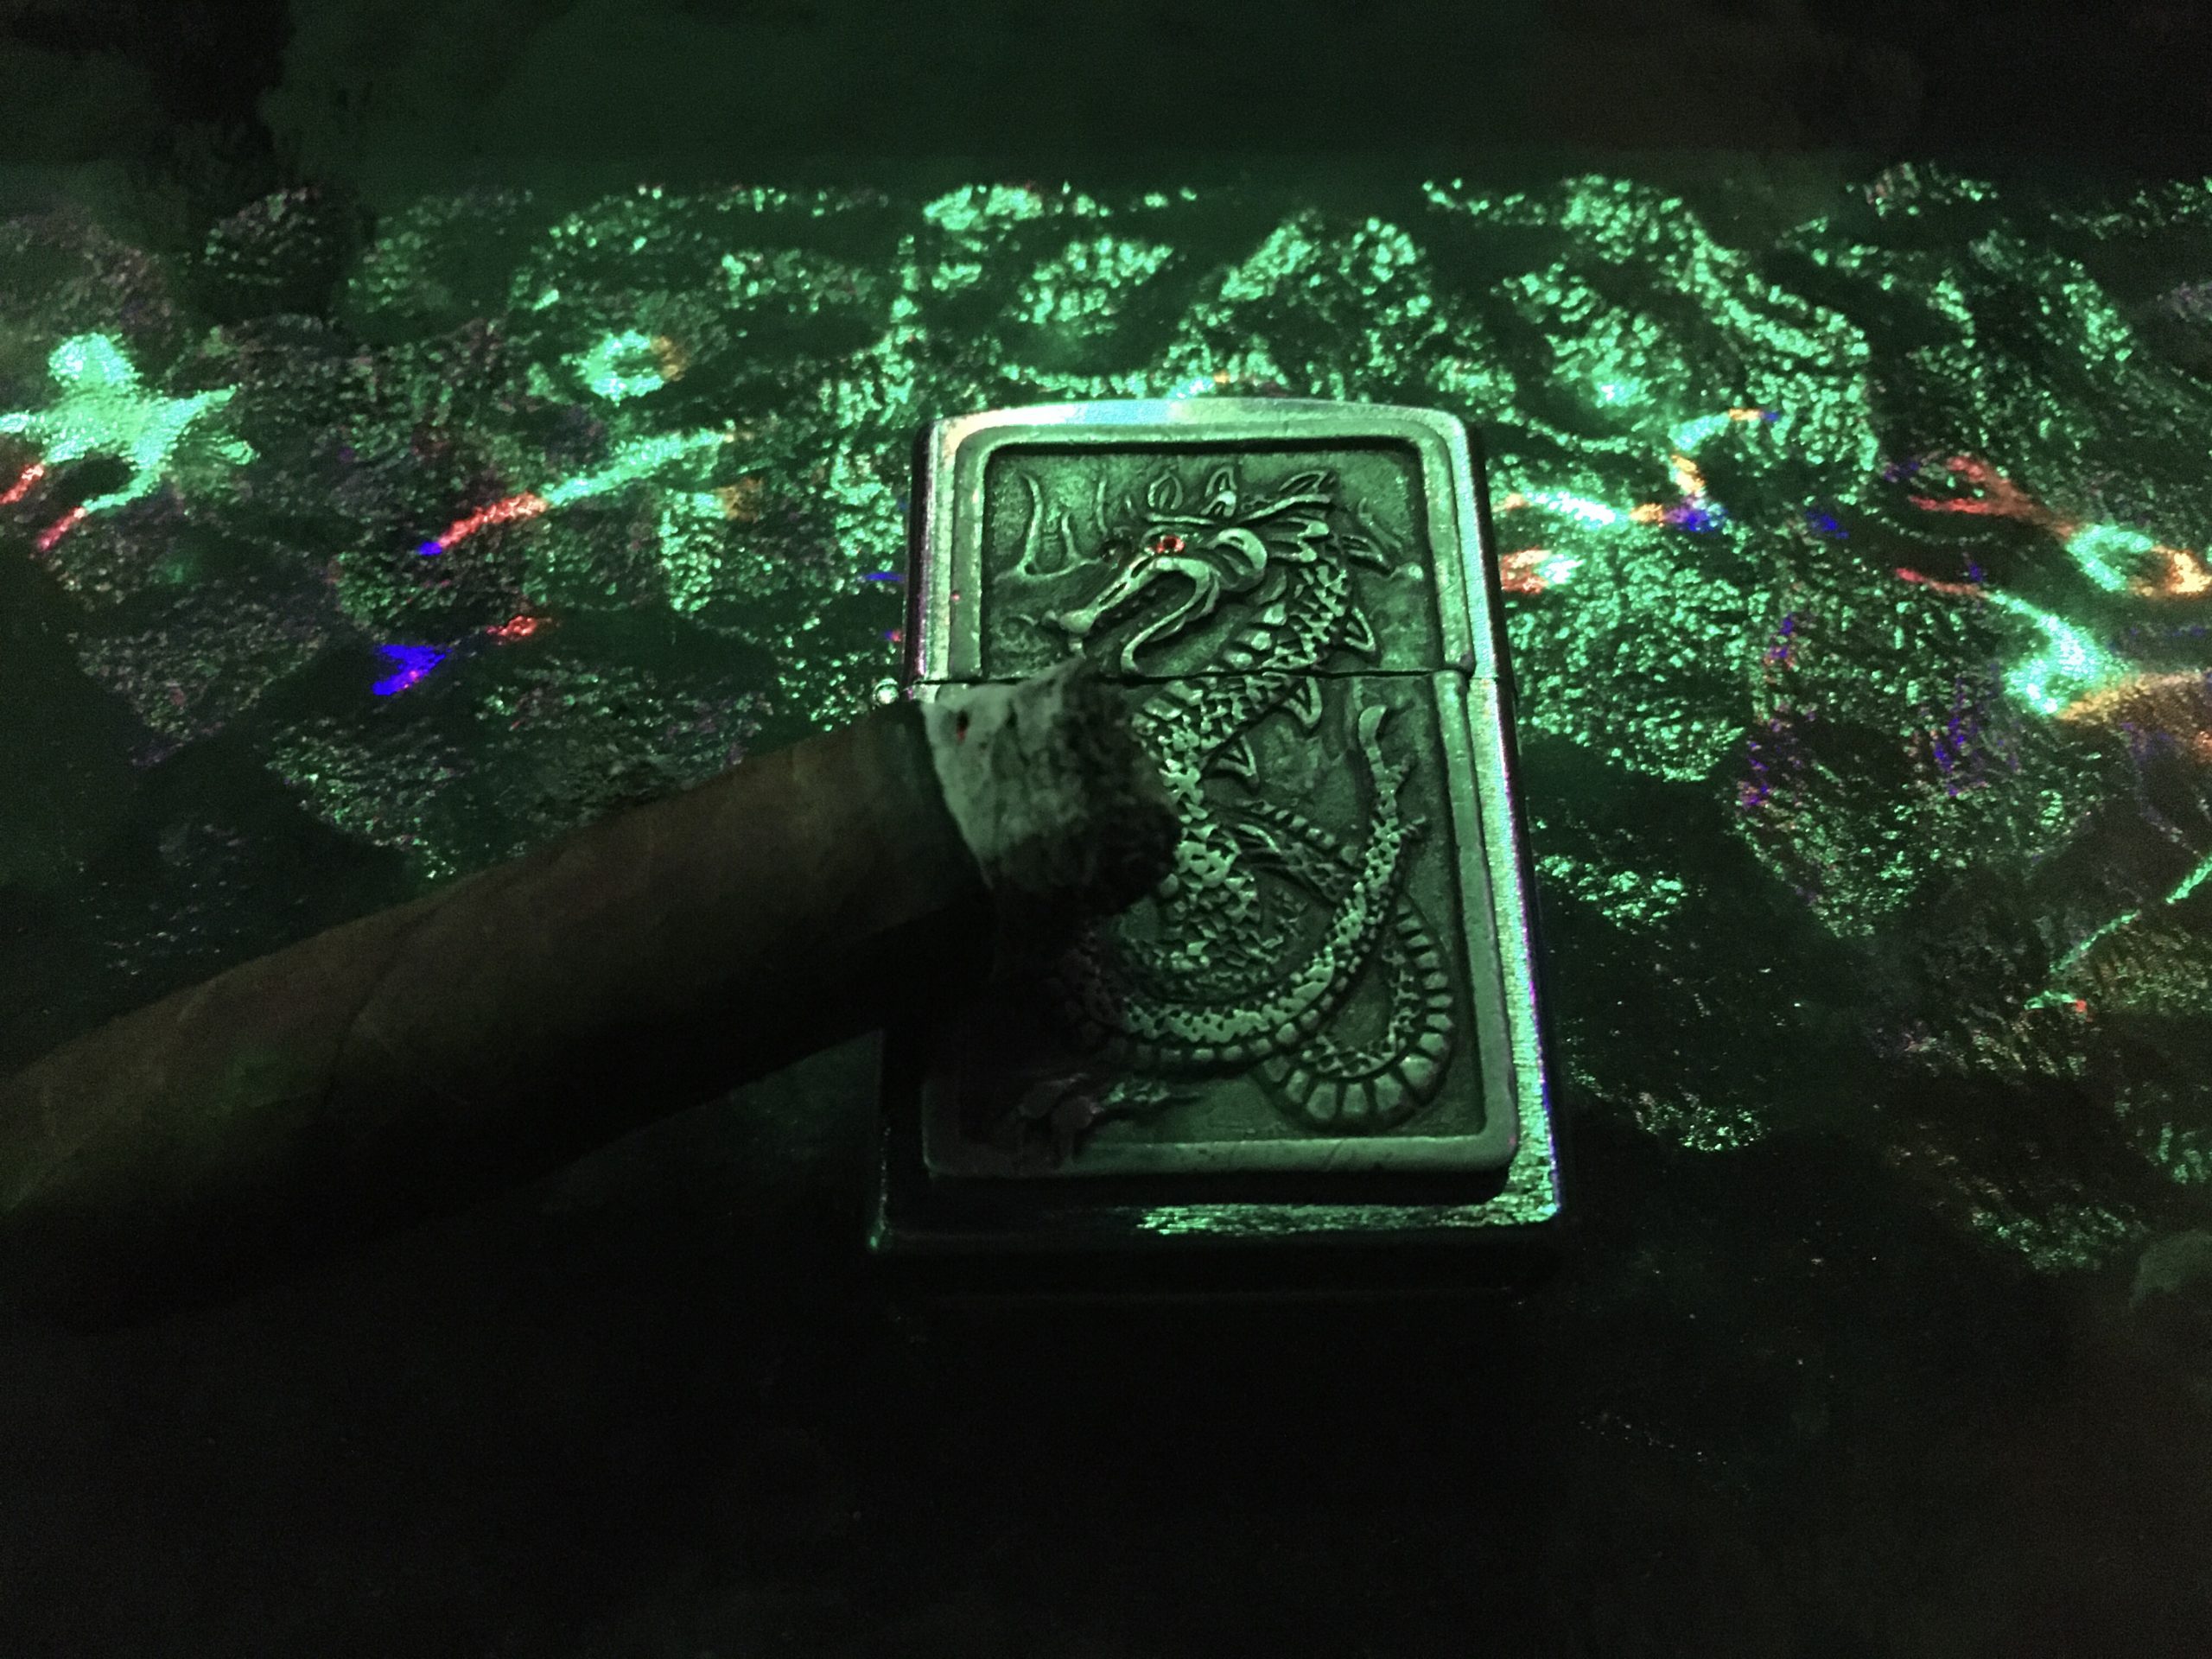 Dragon zippo lighter with lit cigar resting on it